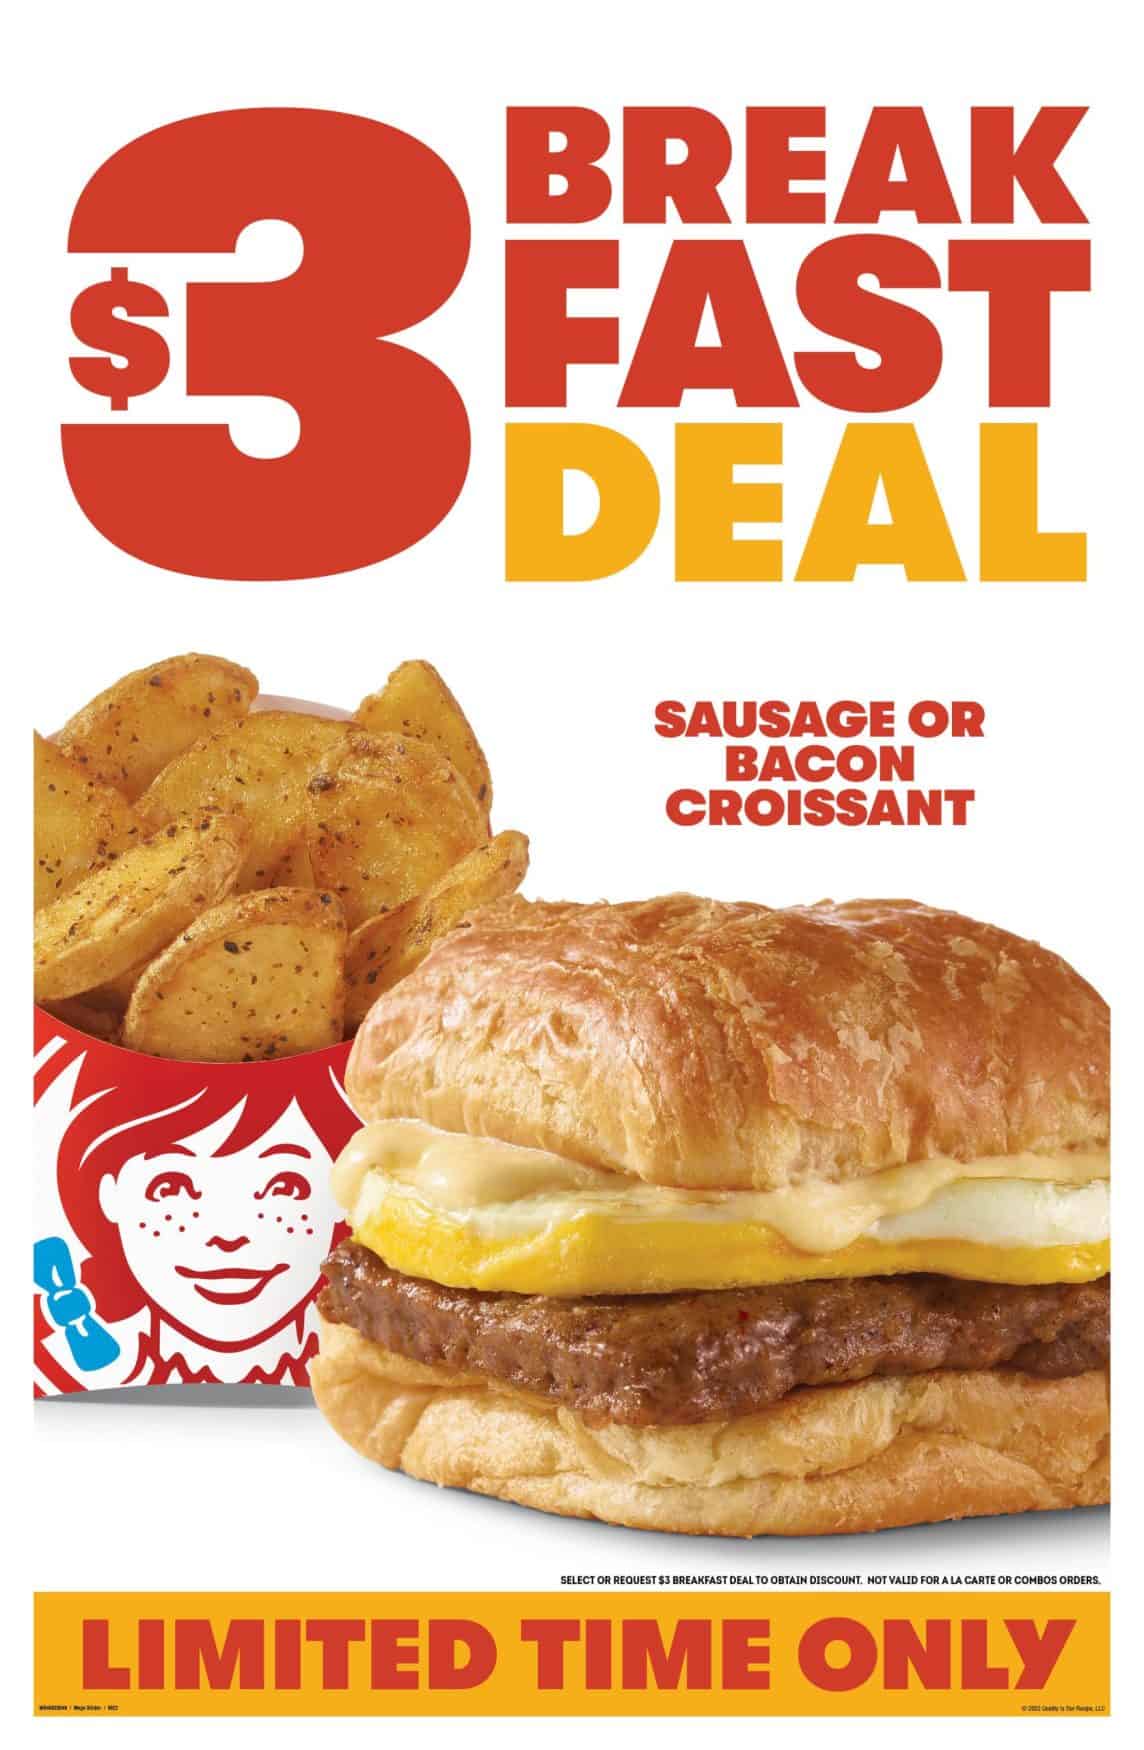 Enjoy 3 Breakfast Deal at Wendy's Living On The Cheap